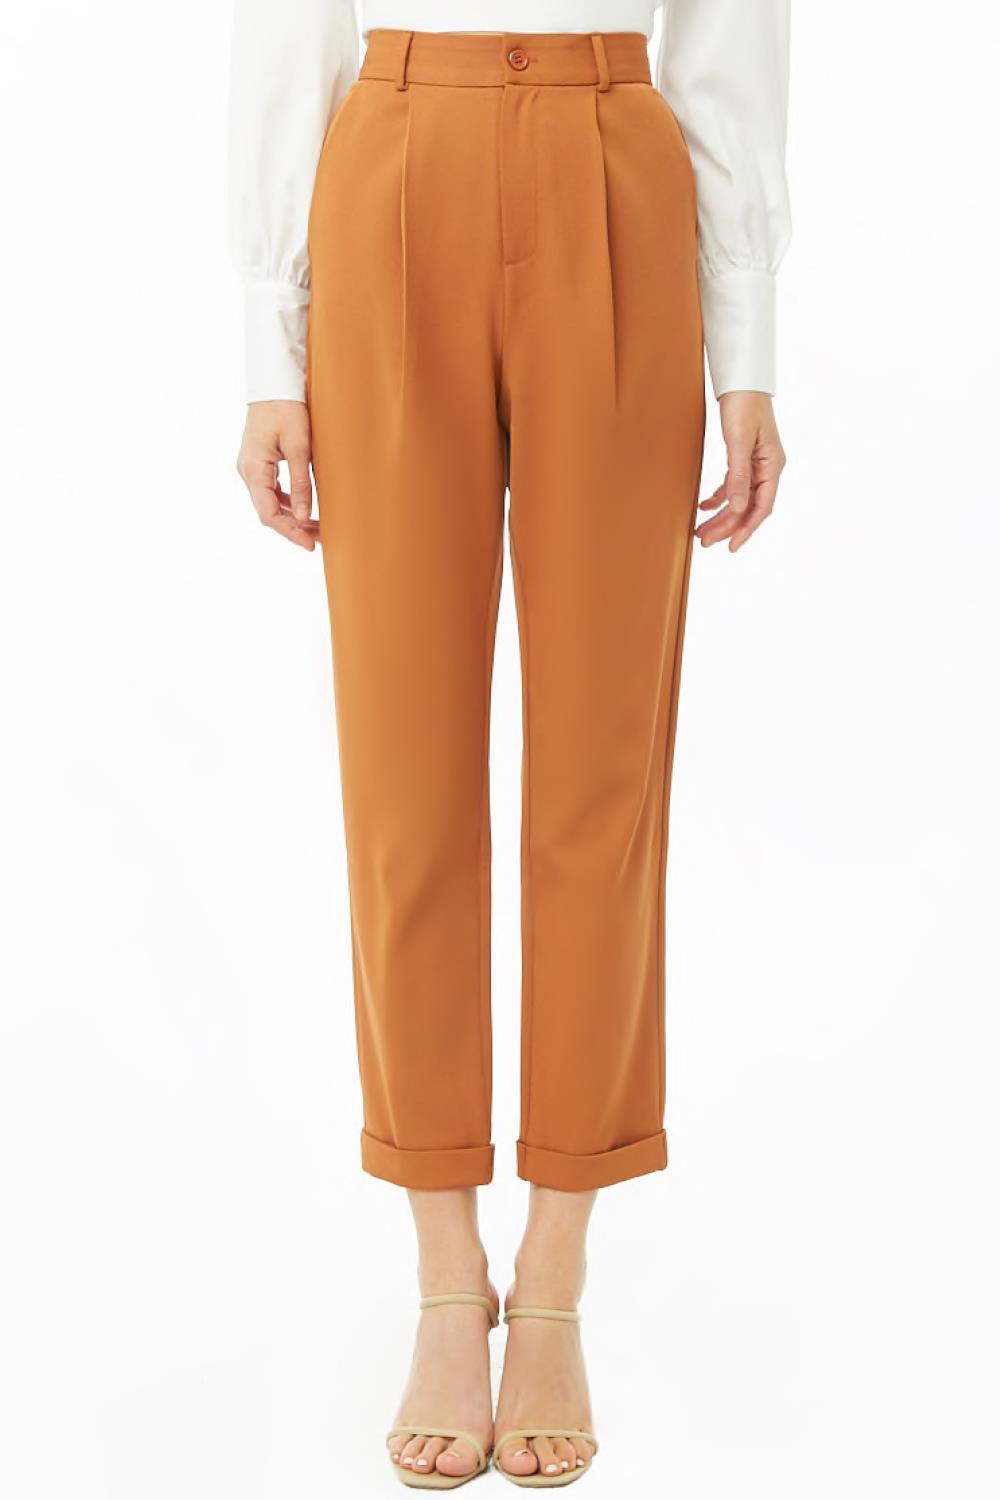 pantalones low cost forever 21 18€